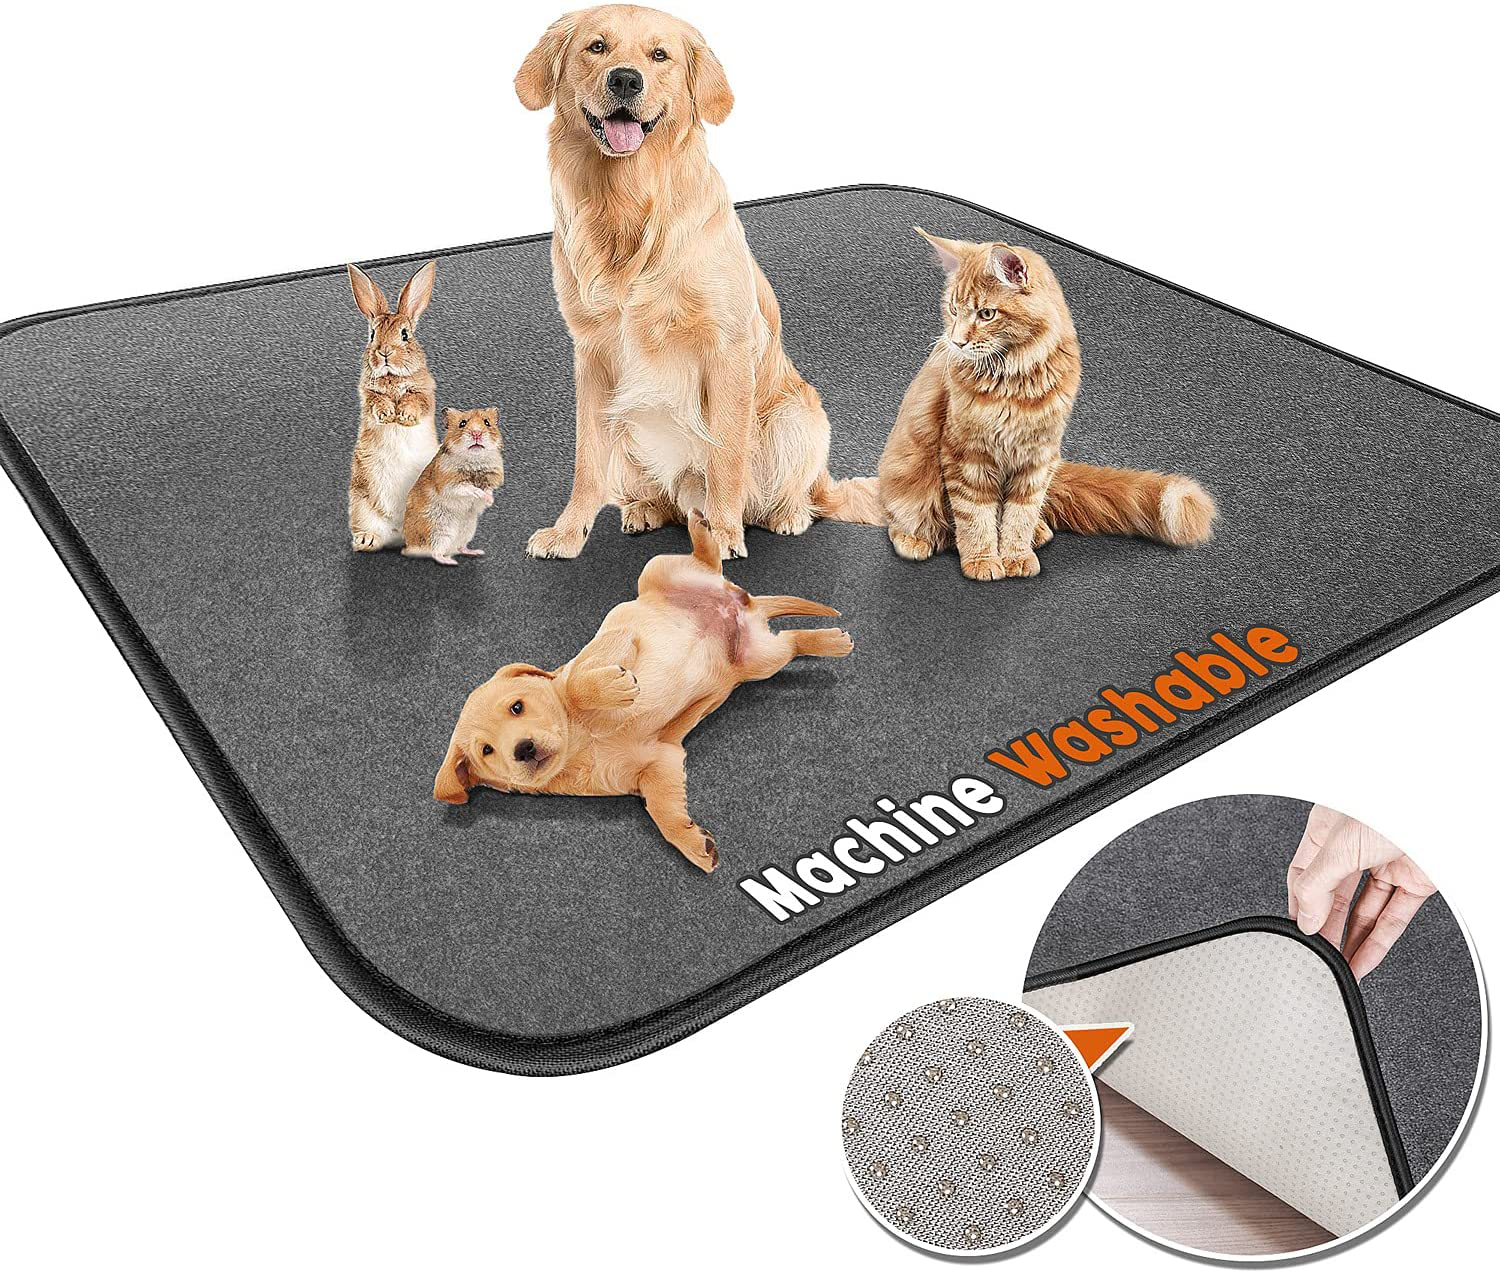 Waterproof Training Dog Pee Mat Strong Water Absorption Dog Bed